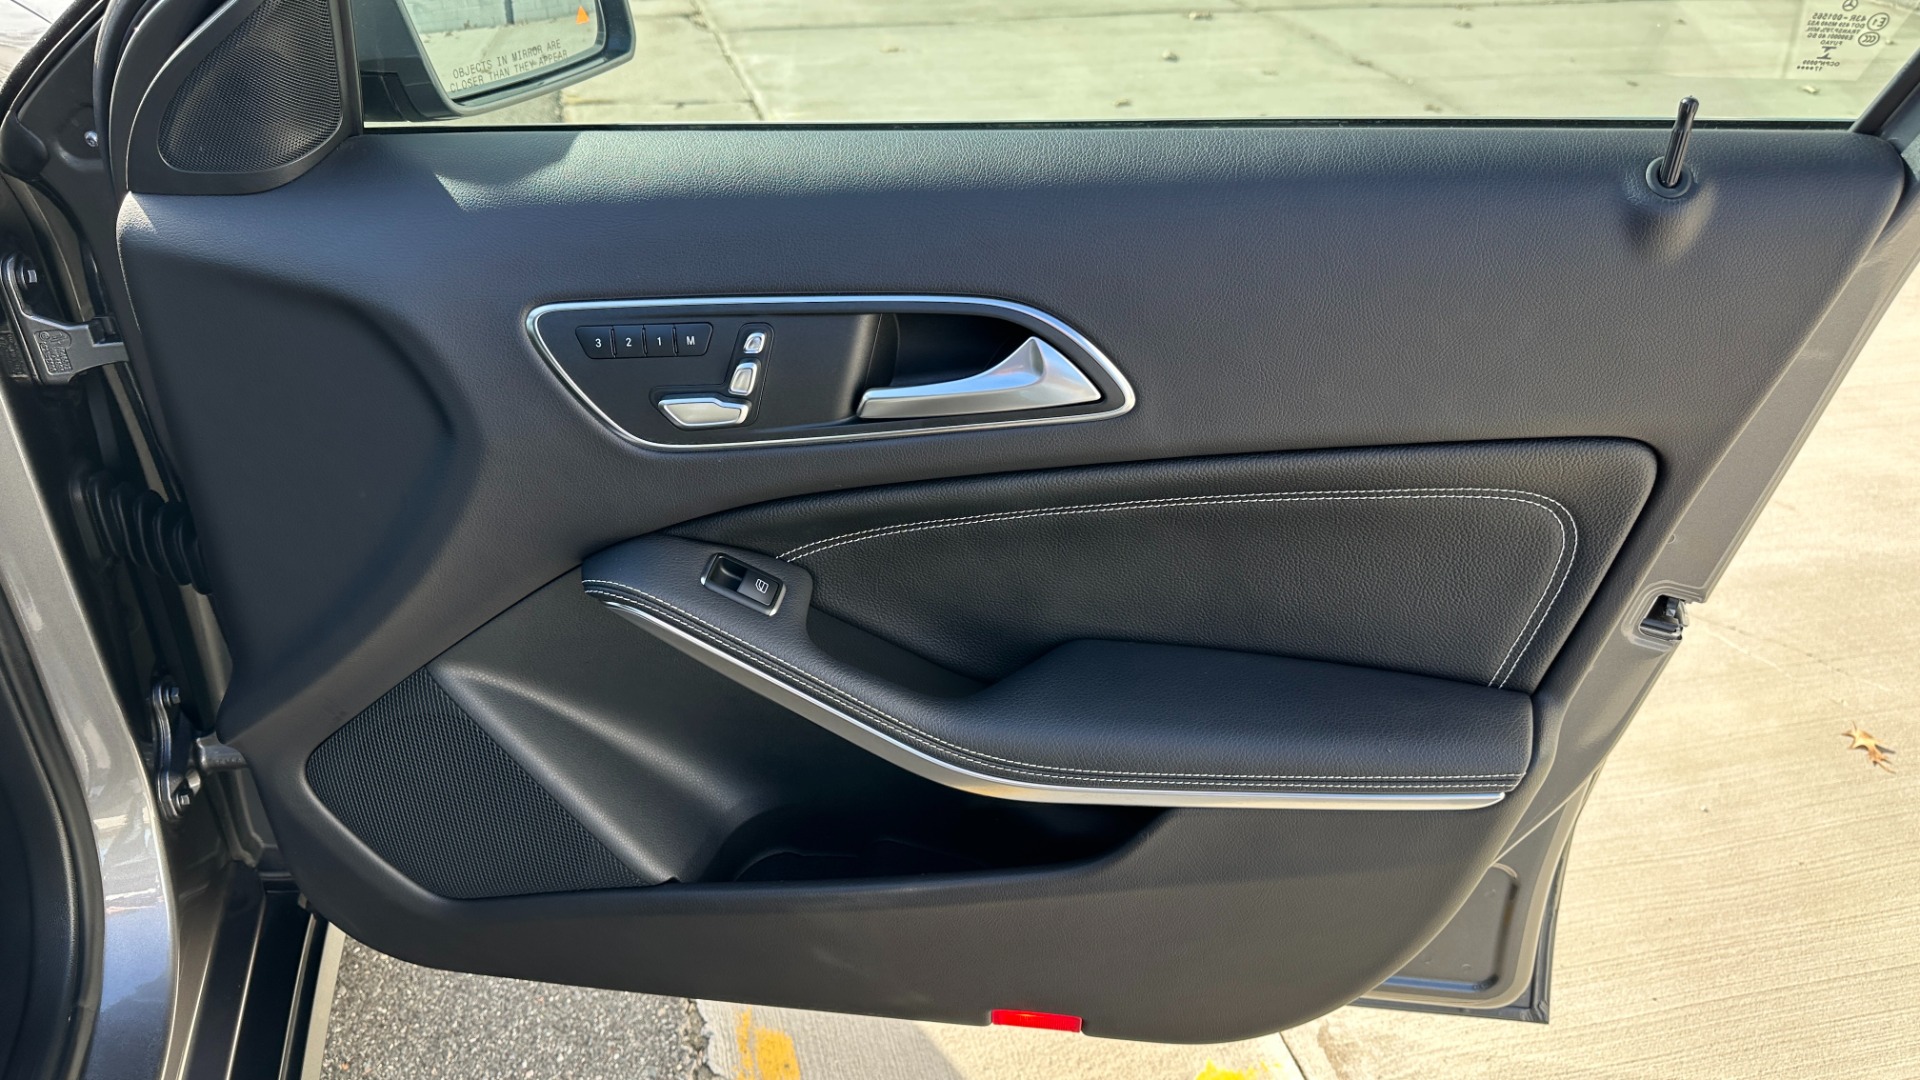 Used 2018 Mercedes-Benz GLA GLA 250 / PANORAMIC SUNROOF / BLIND SPOT ASSIST / HEATED FRONT SEATS for sale $27,999 at Formula Imports in Charlotte NC 28227 29